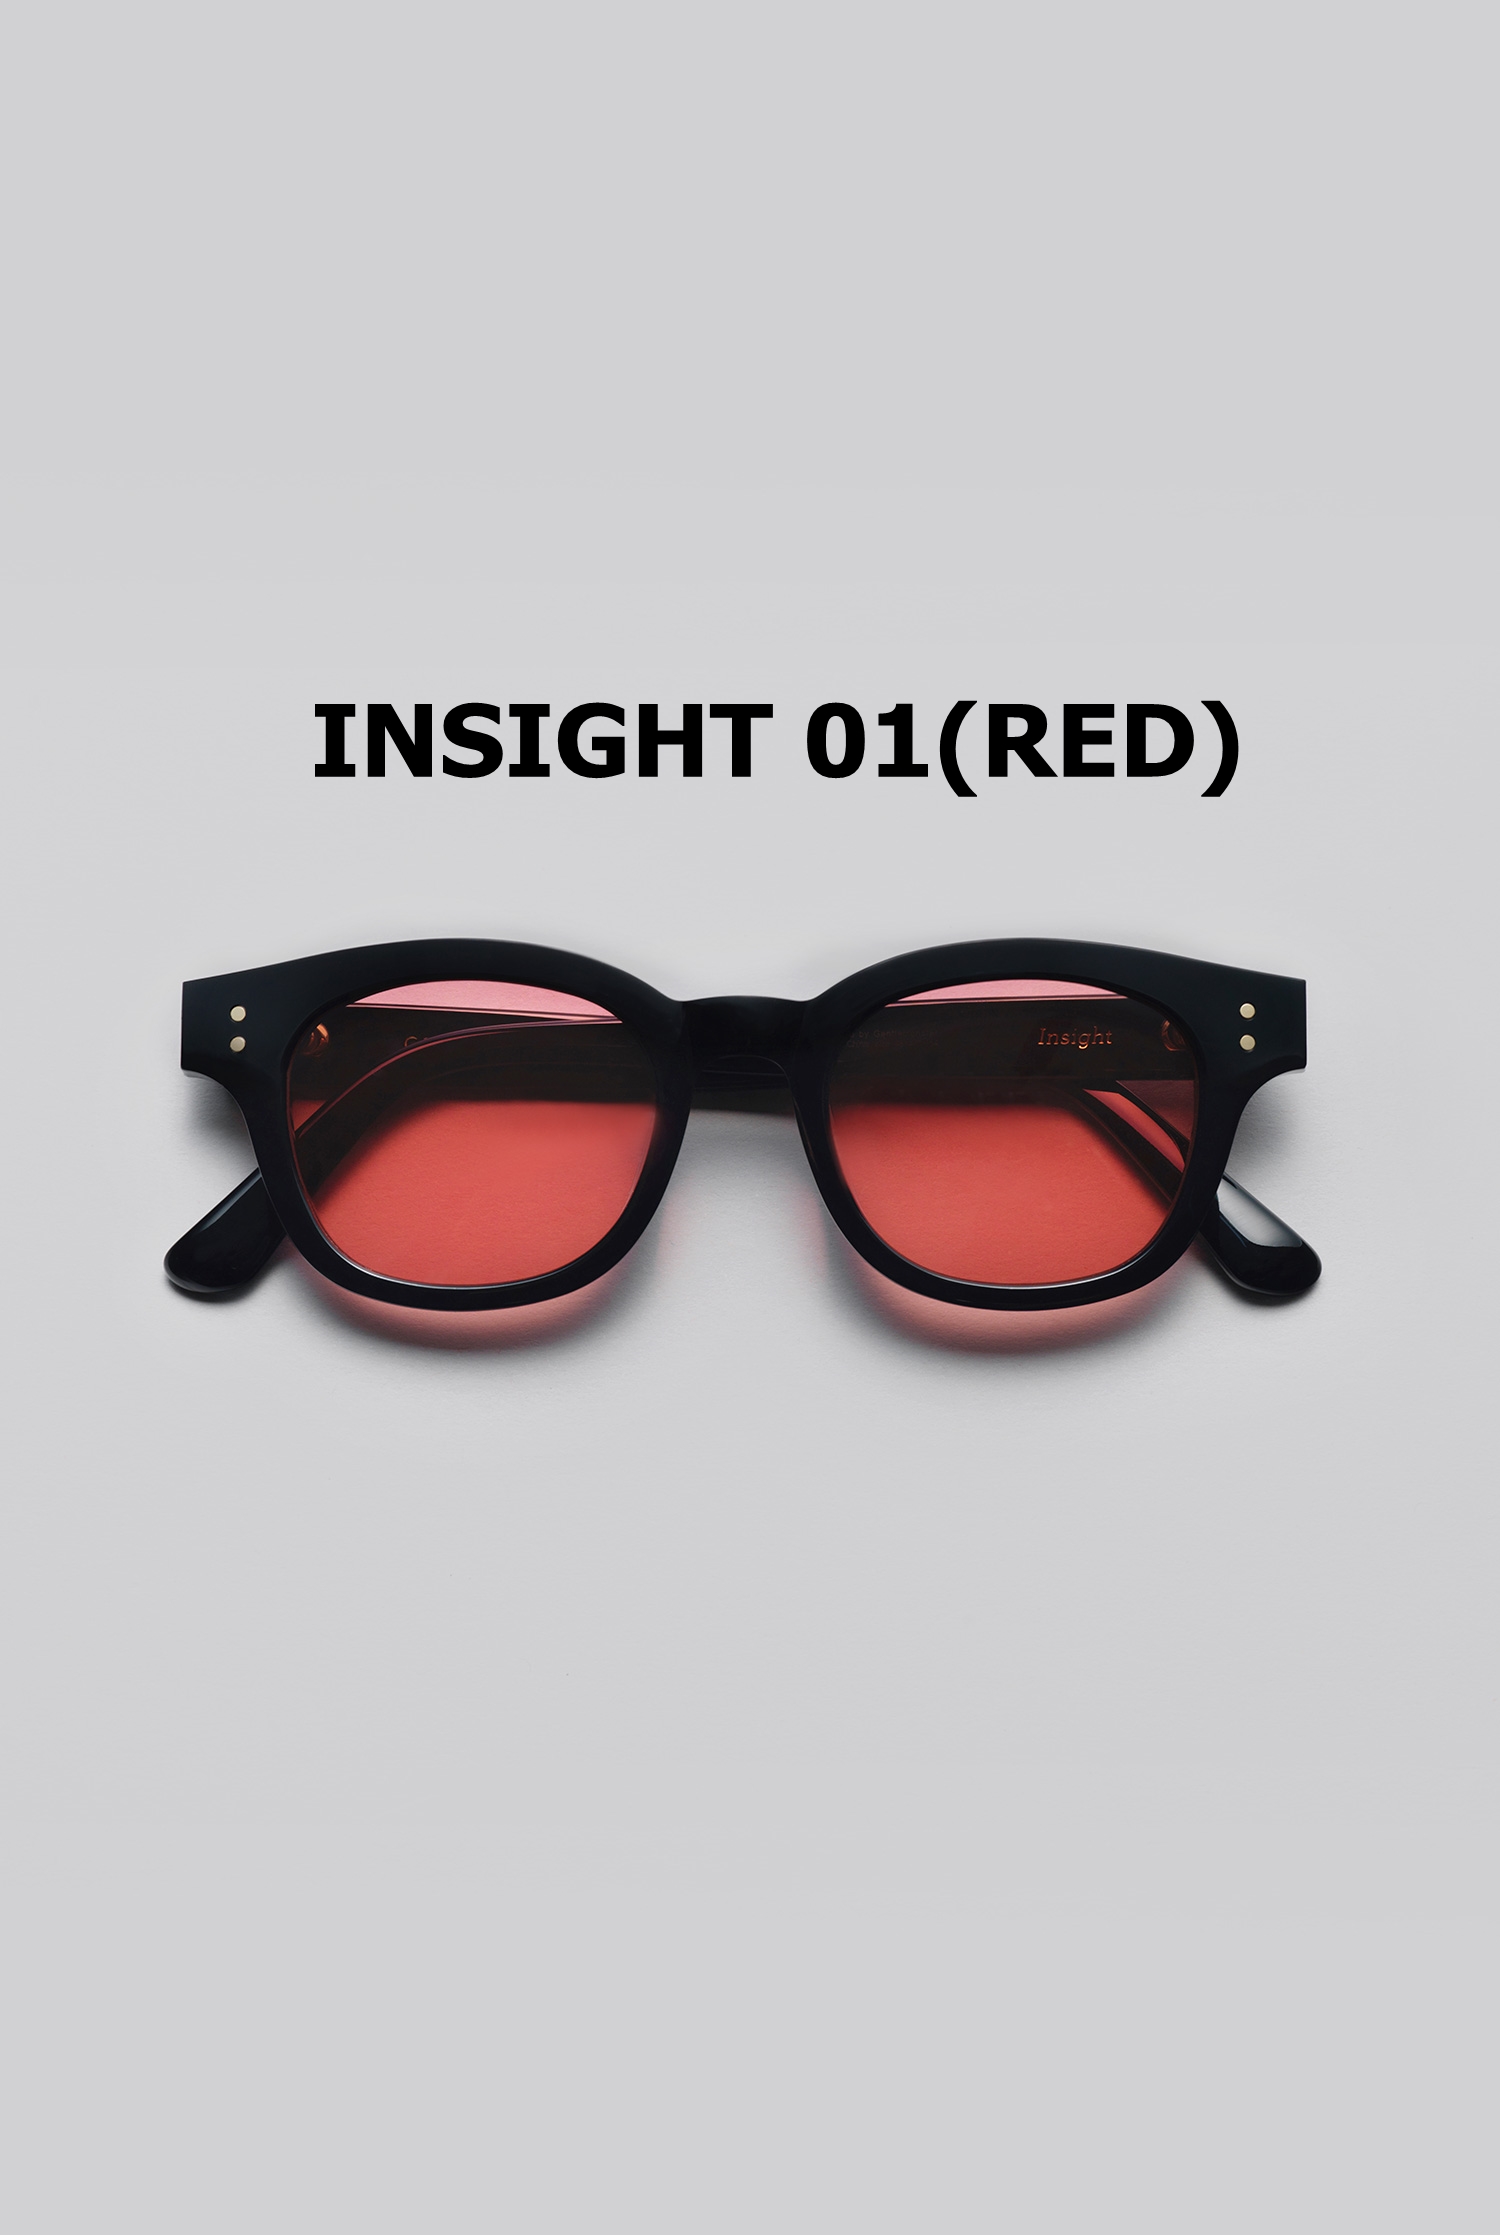 INSIGHT 01(RED)